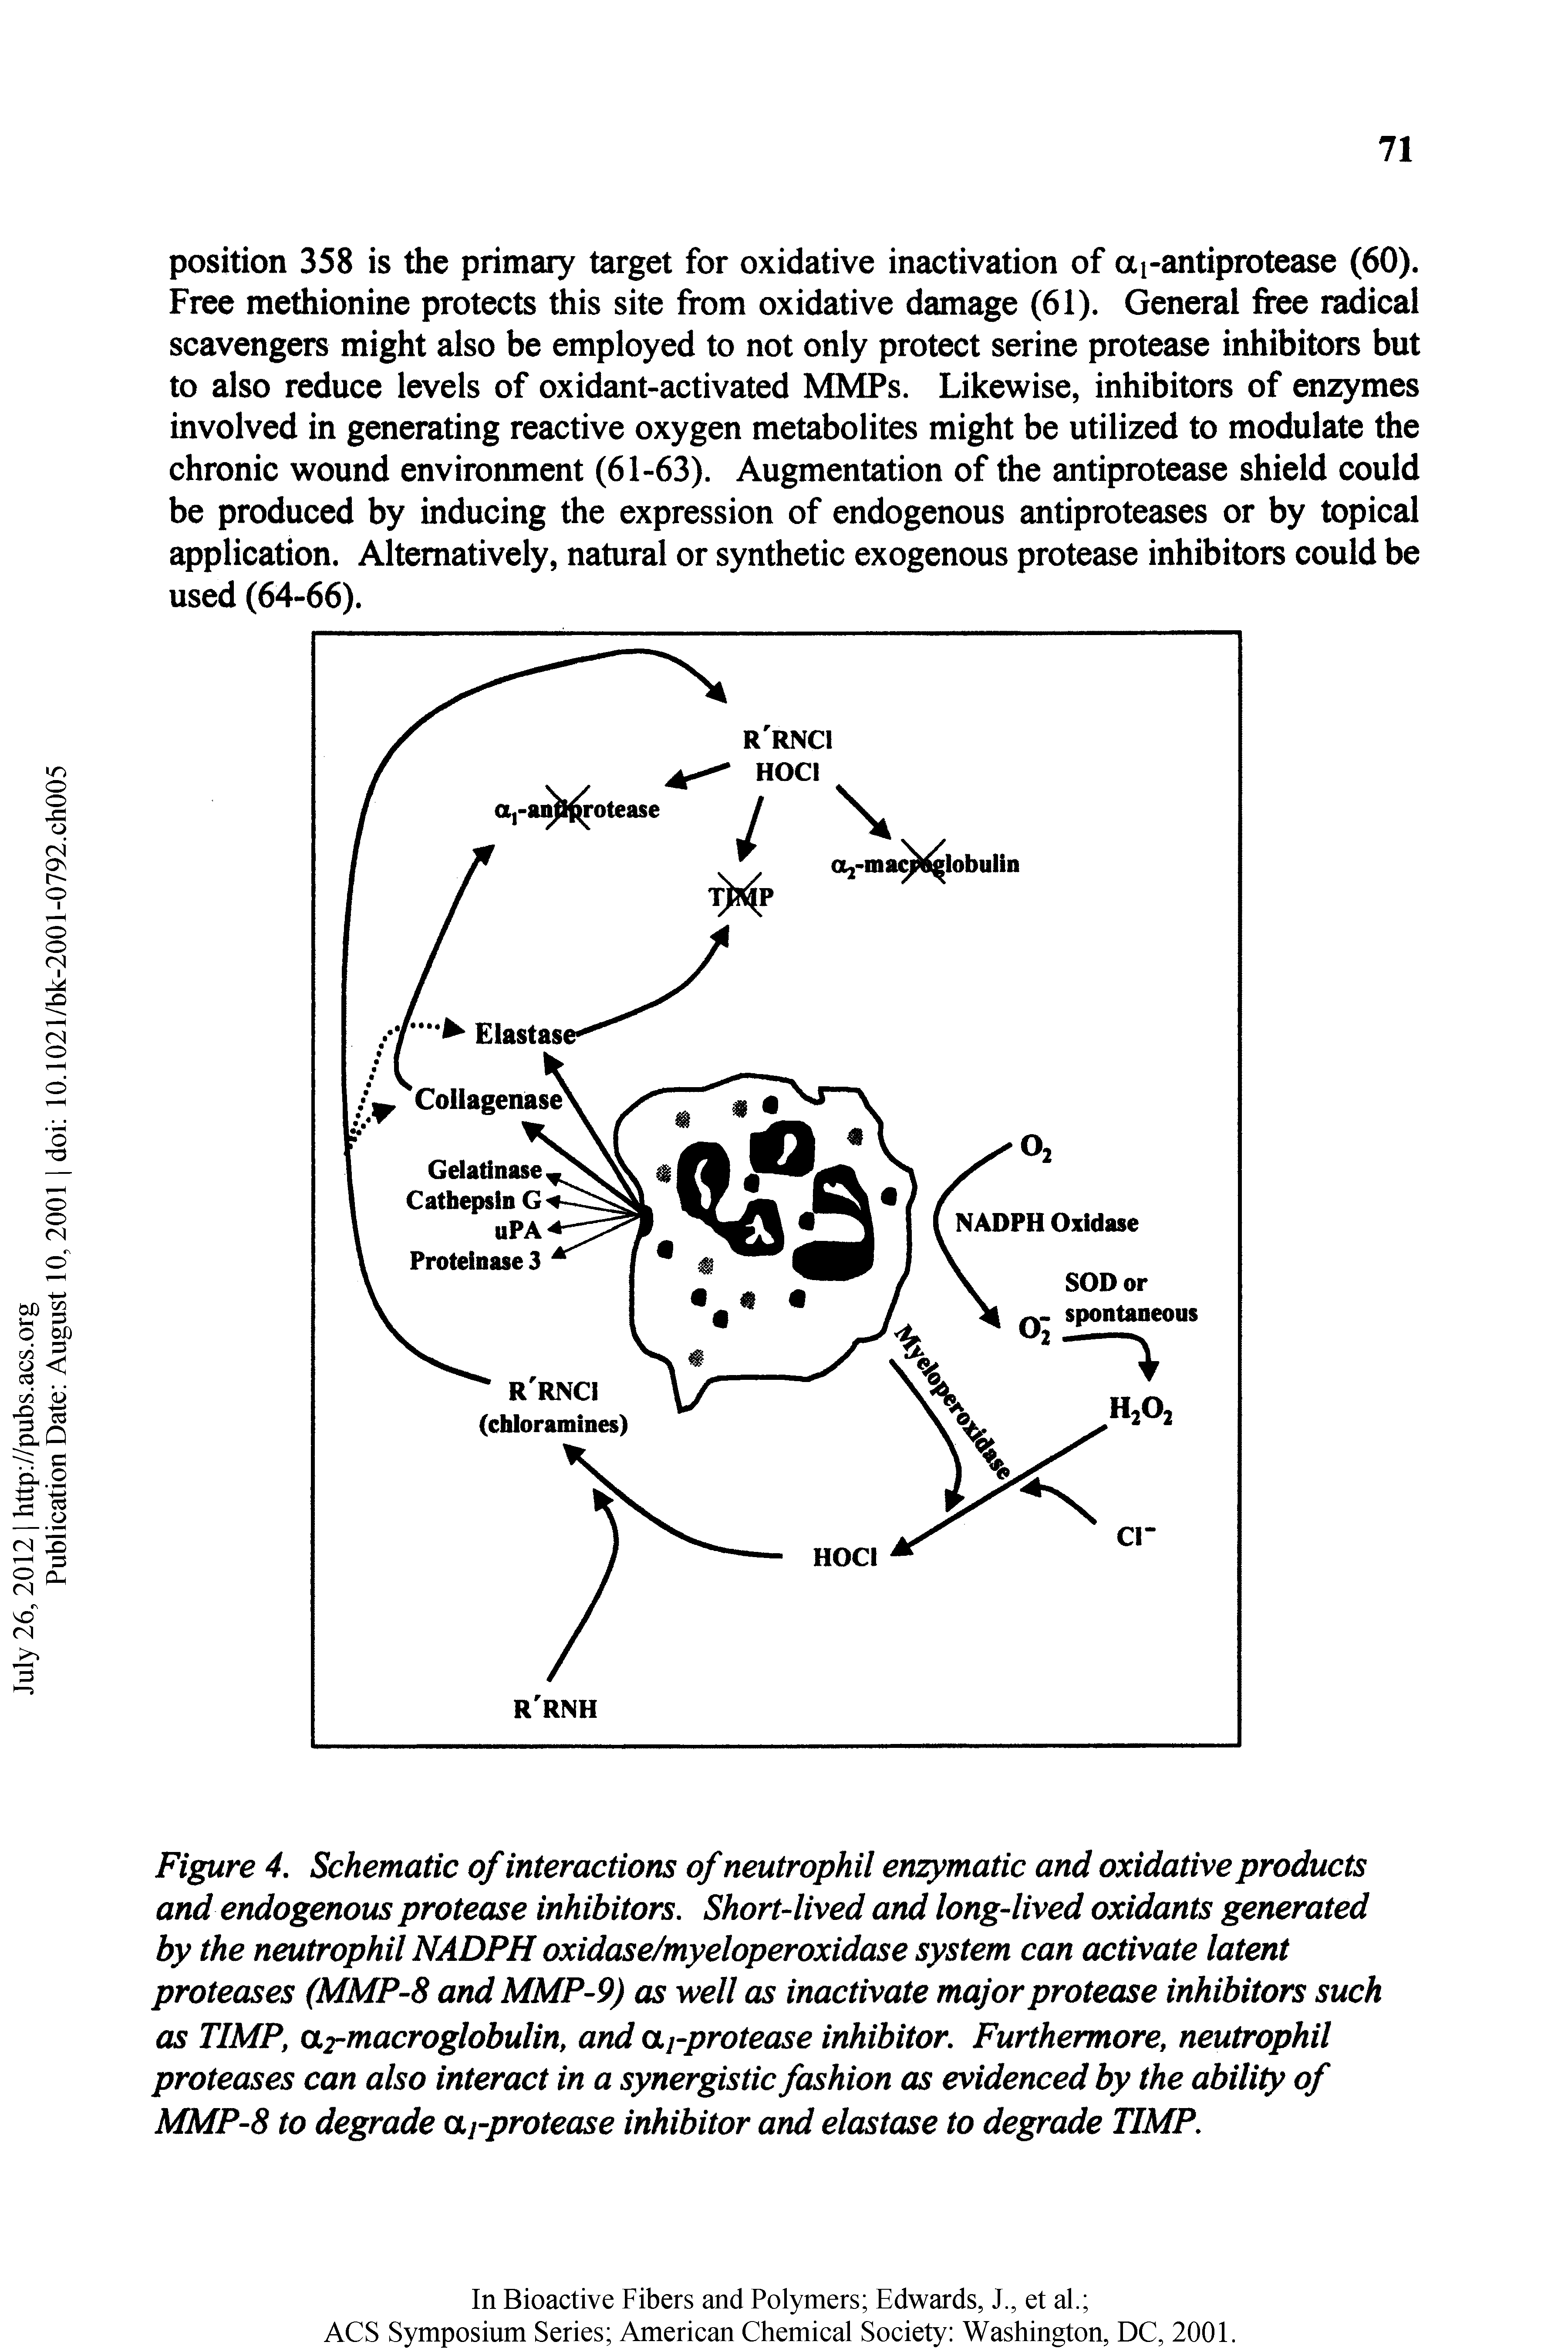 Figure 4, Schematic of interactions of neutrophil enzymatic and oxidative products and endogenous protease inhibitors. Short-lived and long-lived oxidants generated by the neutrophil NADPH oxidase/myeloperoxidase system can activate latent proteases (MMP-S and MMP-9) as well as inactivate major protease inhibitors such as TIMP, armacroglobulin, and aj-protease inhibitor. Furthermore, neutrophil proteases can also interact in a synergistic fashion as evidenced by the ability of MMP-8 to degrade aj-protease inhibitor and elastase to degrade TIMP.